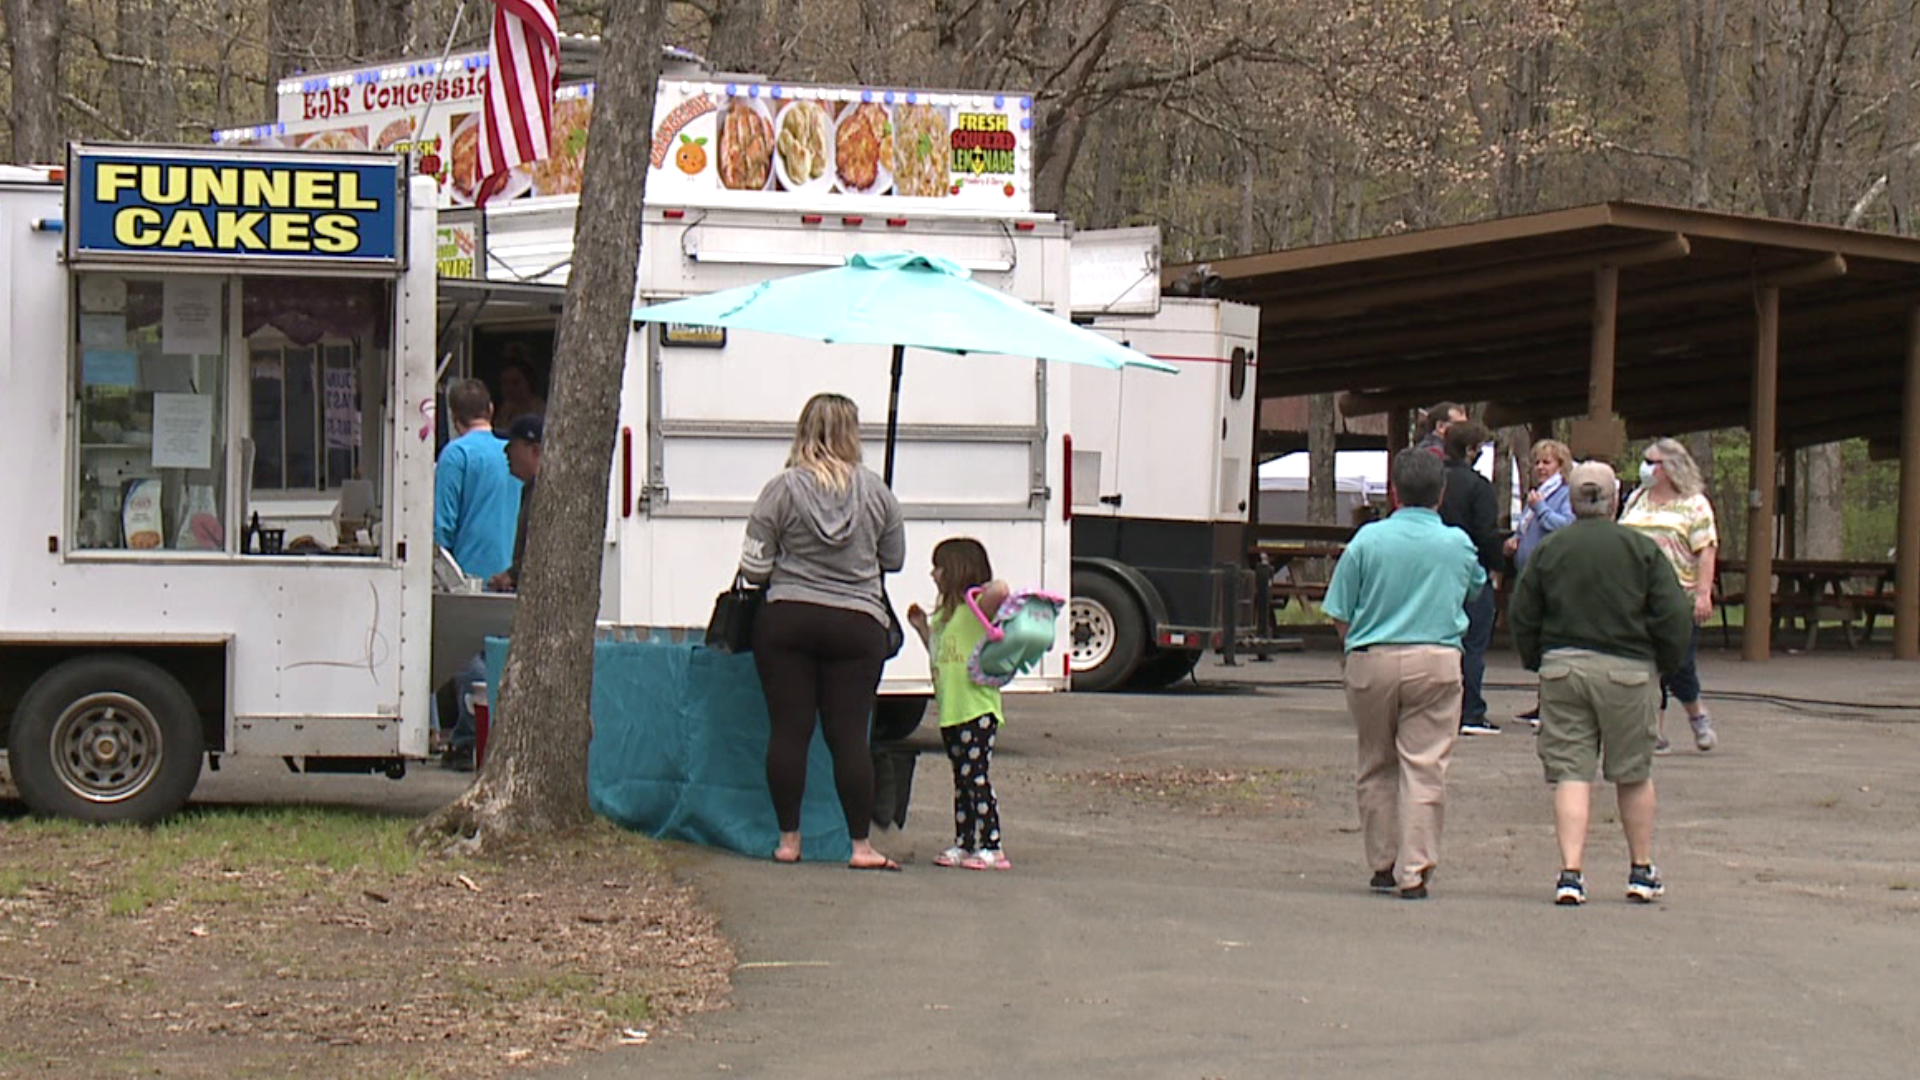 A fire company in Hazle Township teamed up with food truck owners for the fundraiser.